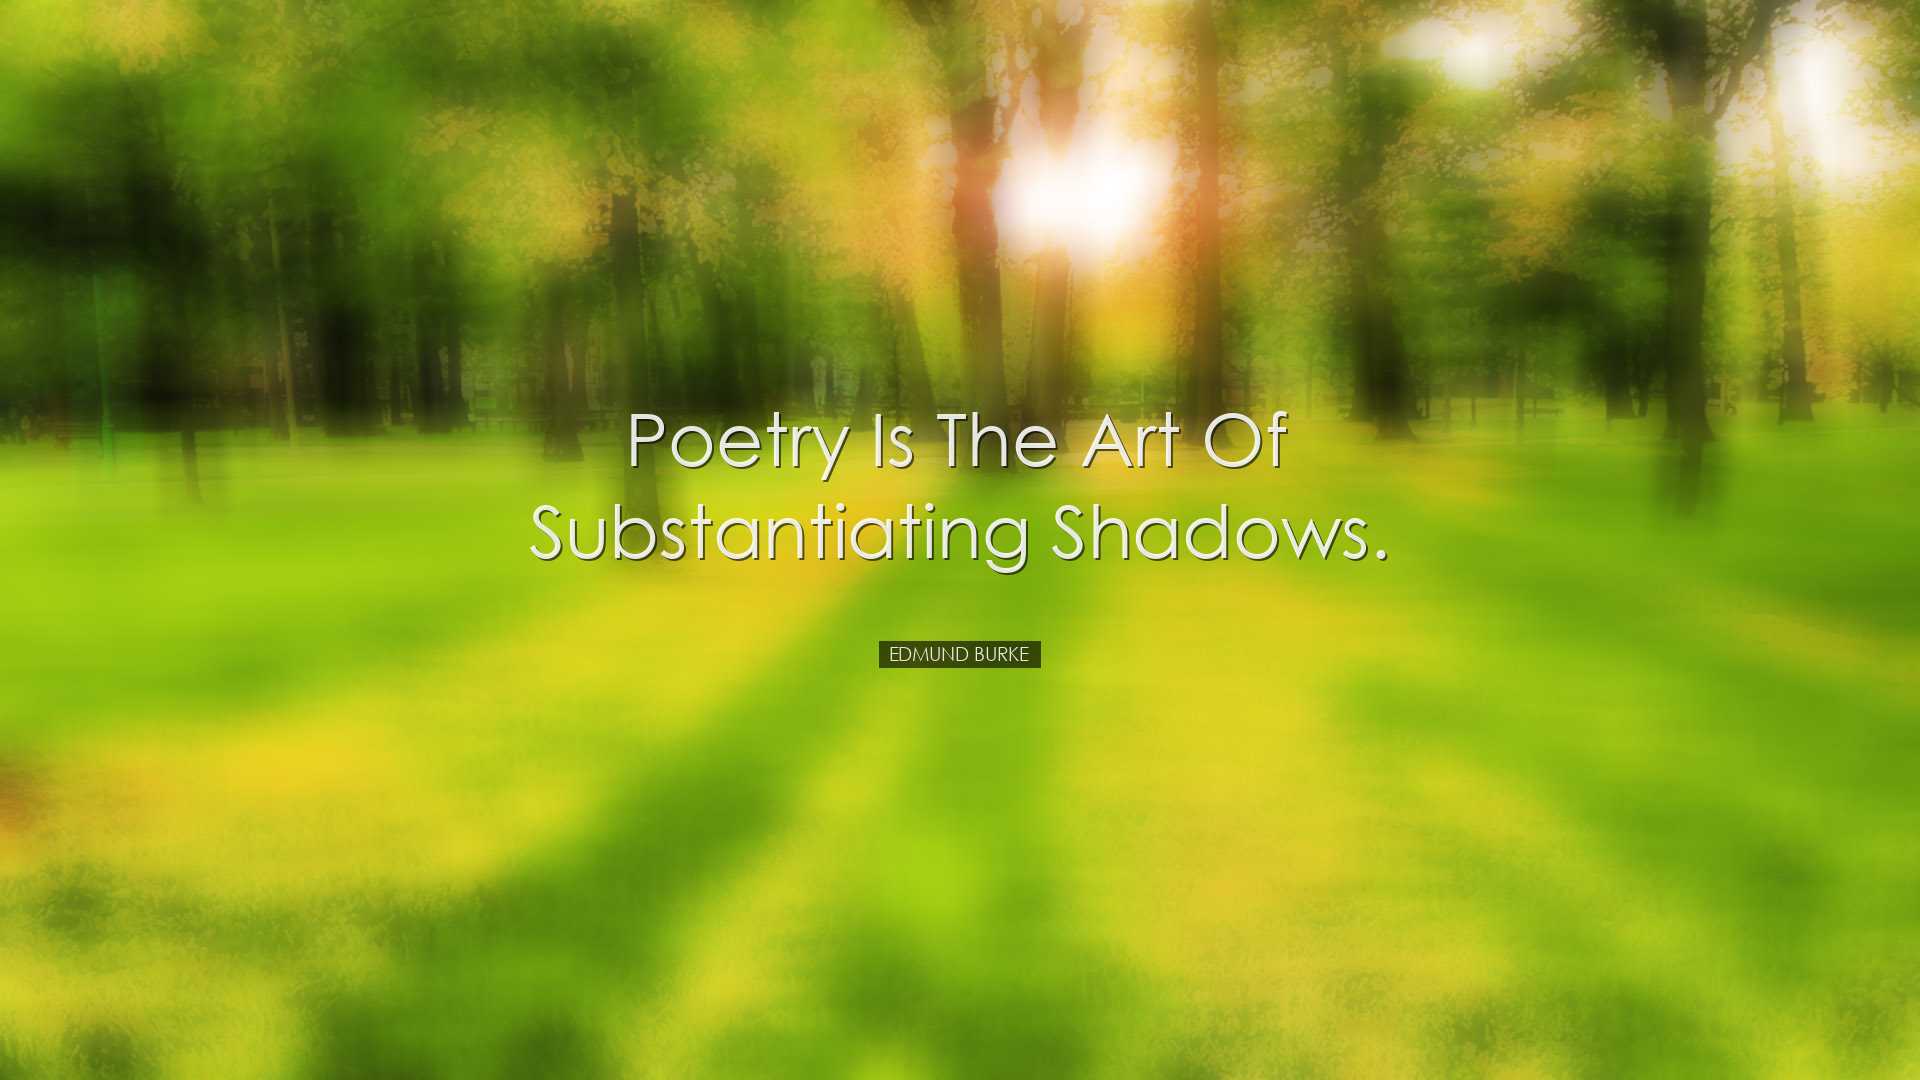 Poetry is the art of substantiating shadows. - Edmund Burke